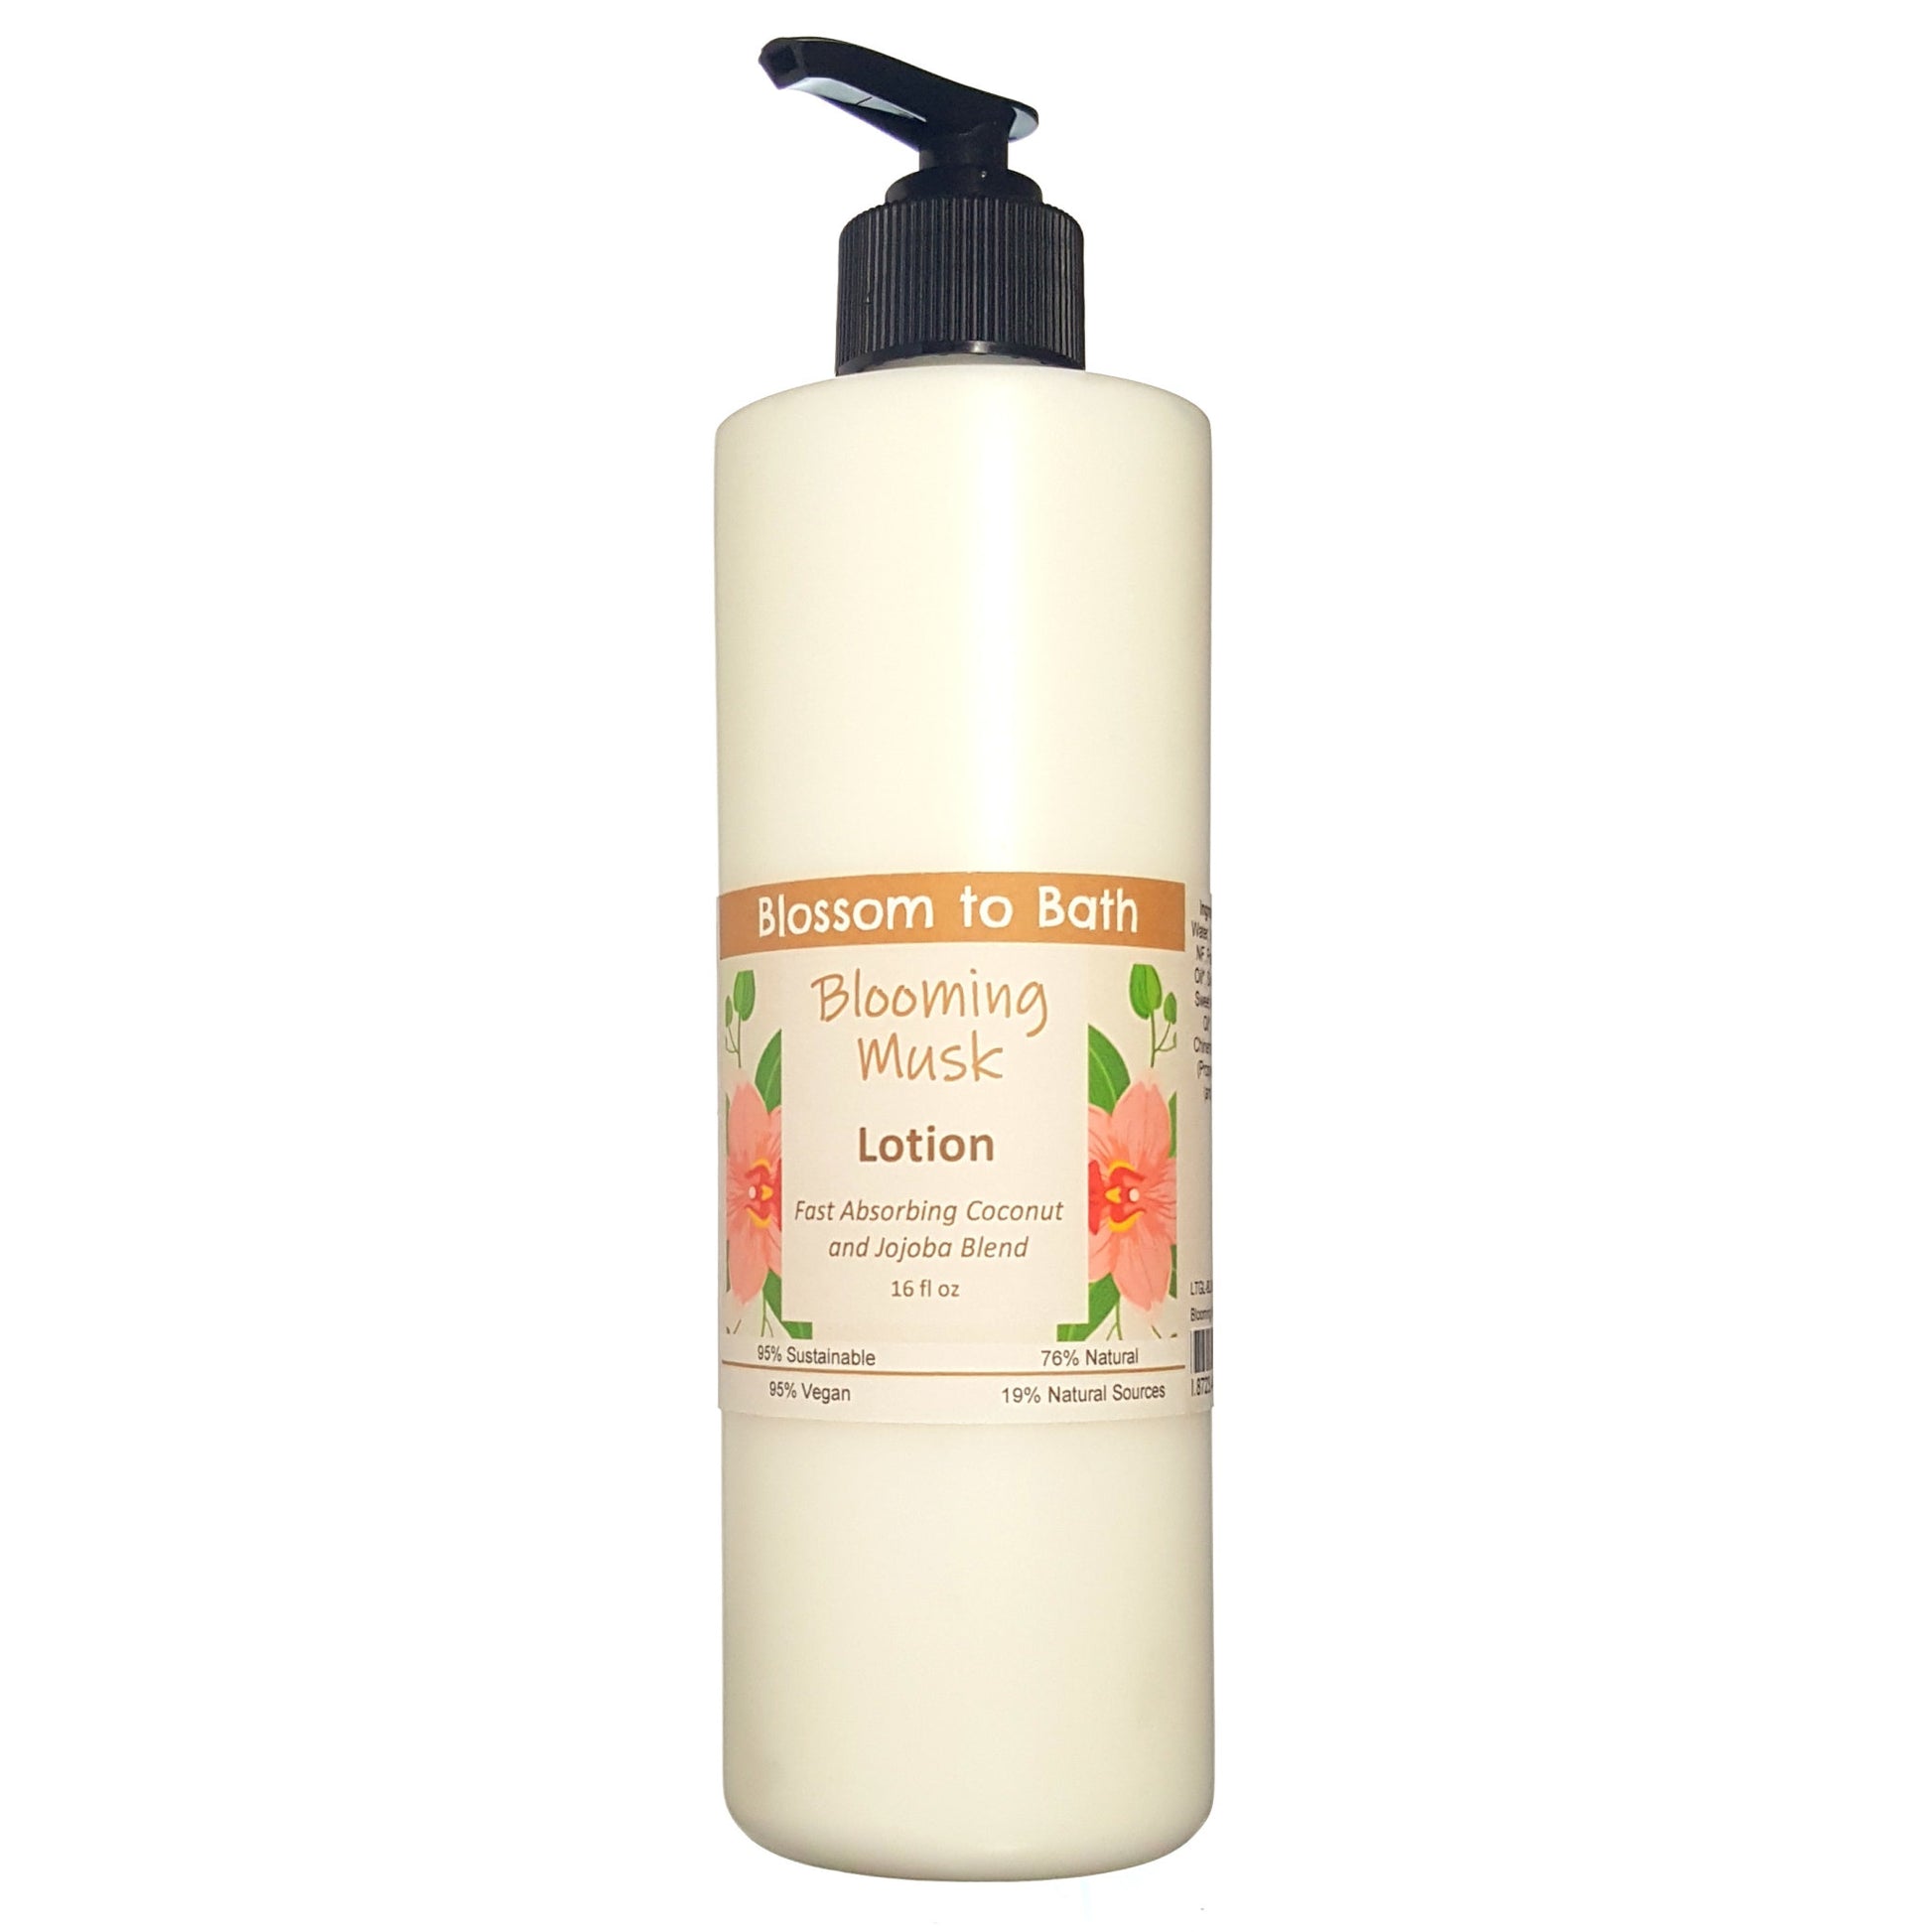 Buy Blossom to Bath Blooming Musk Lotion from Flowersong Soap Studio.  Daily moisture luxury that soaks in quickly made with organic oils and butters that soften and smooth the skin  A sensual floral and musk scent that is subtle and feminine.